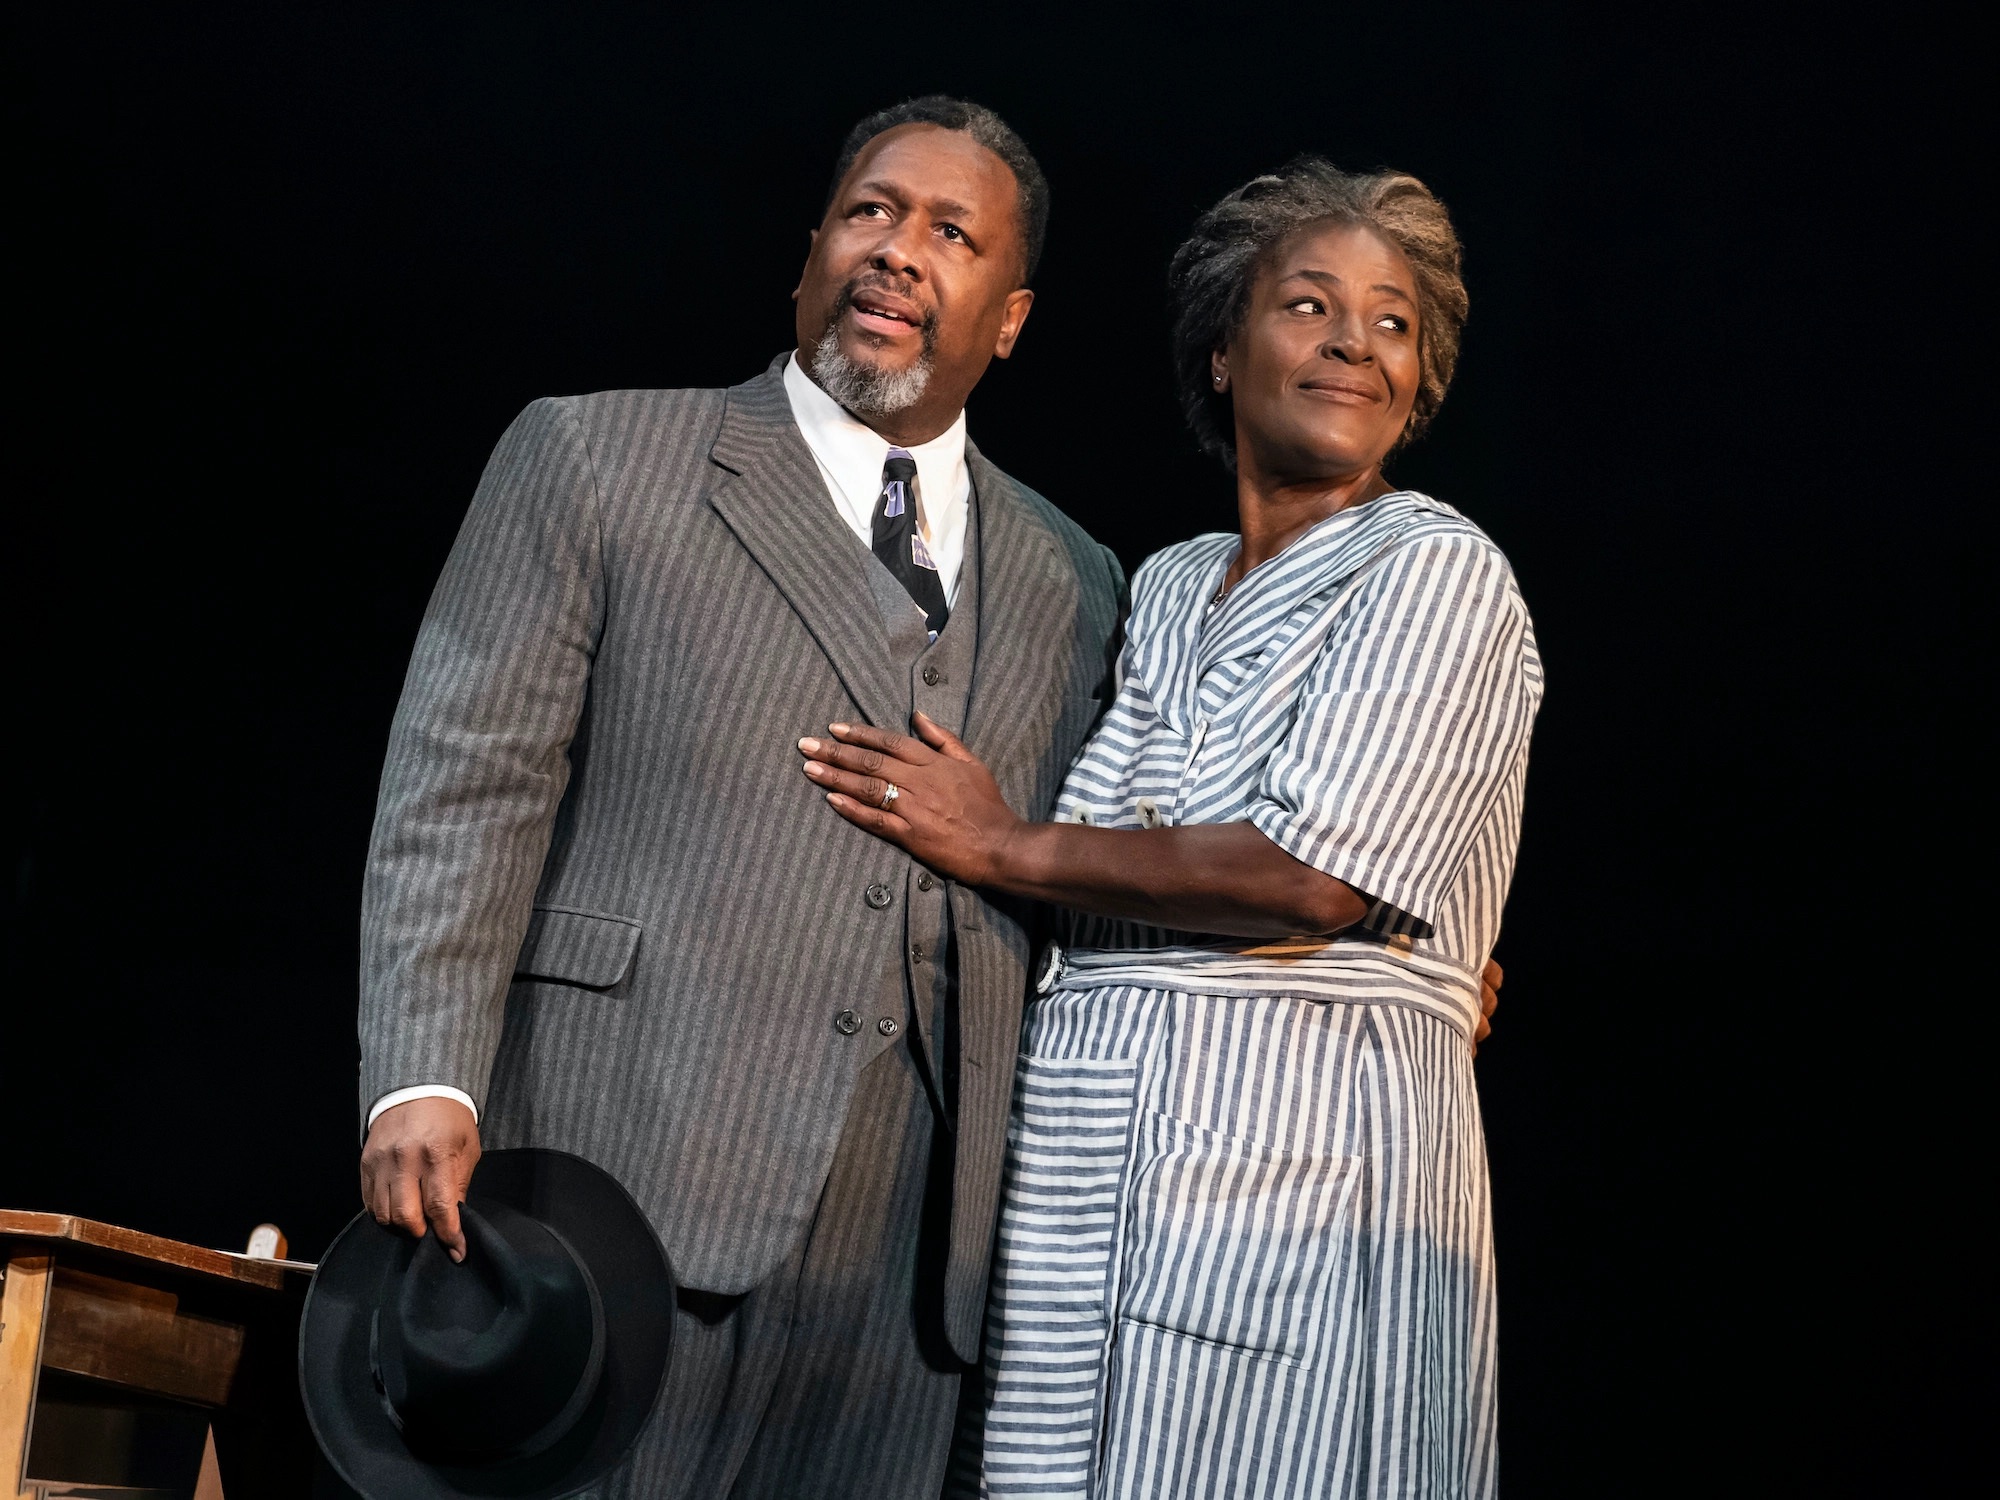 Wendell Pierce as Willy Loman in Death of a salesman. Image courtesy of salesmanonbroadway.com